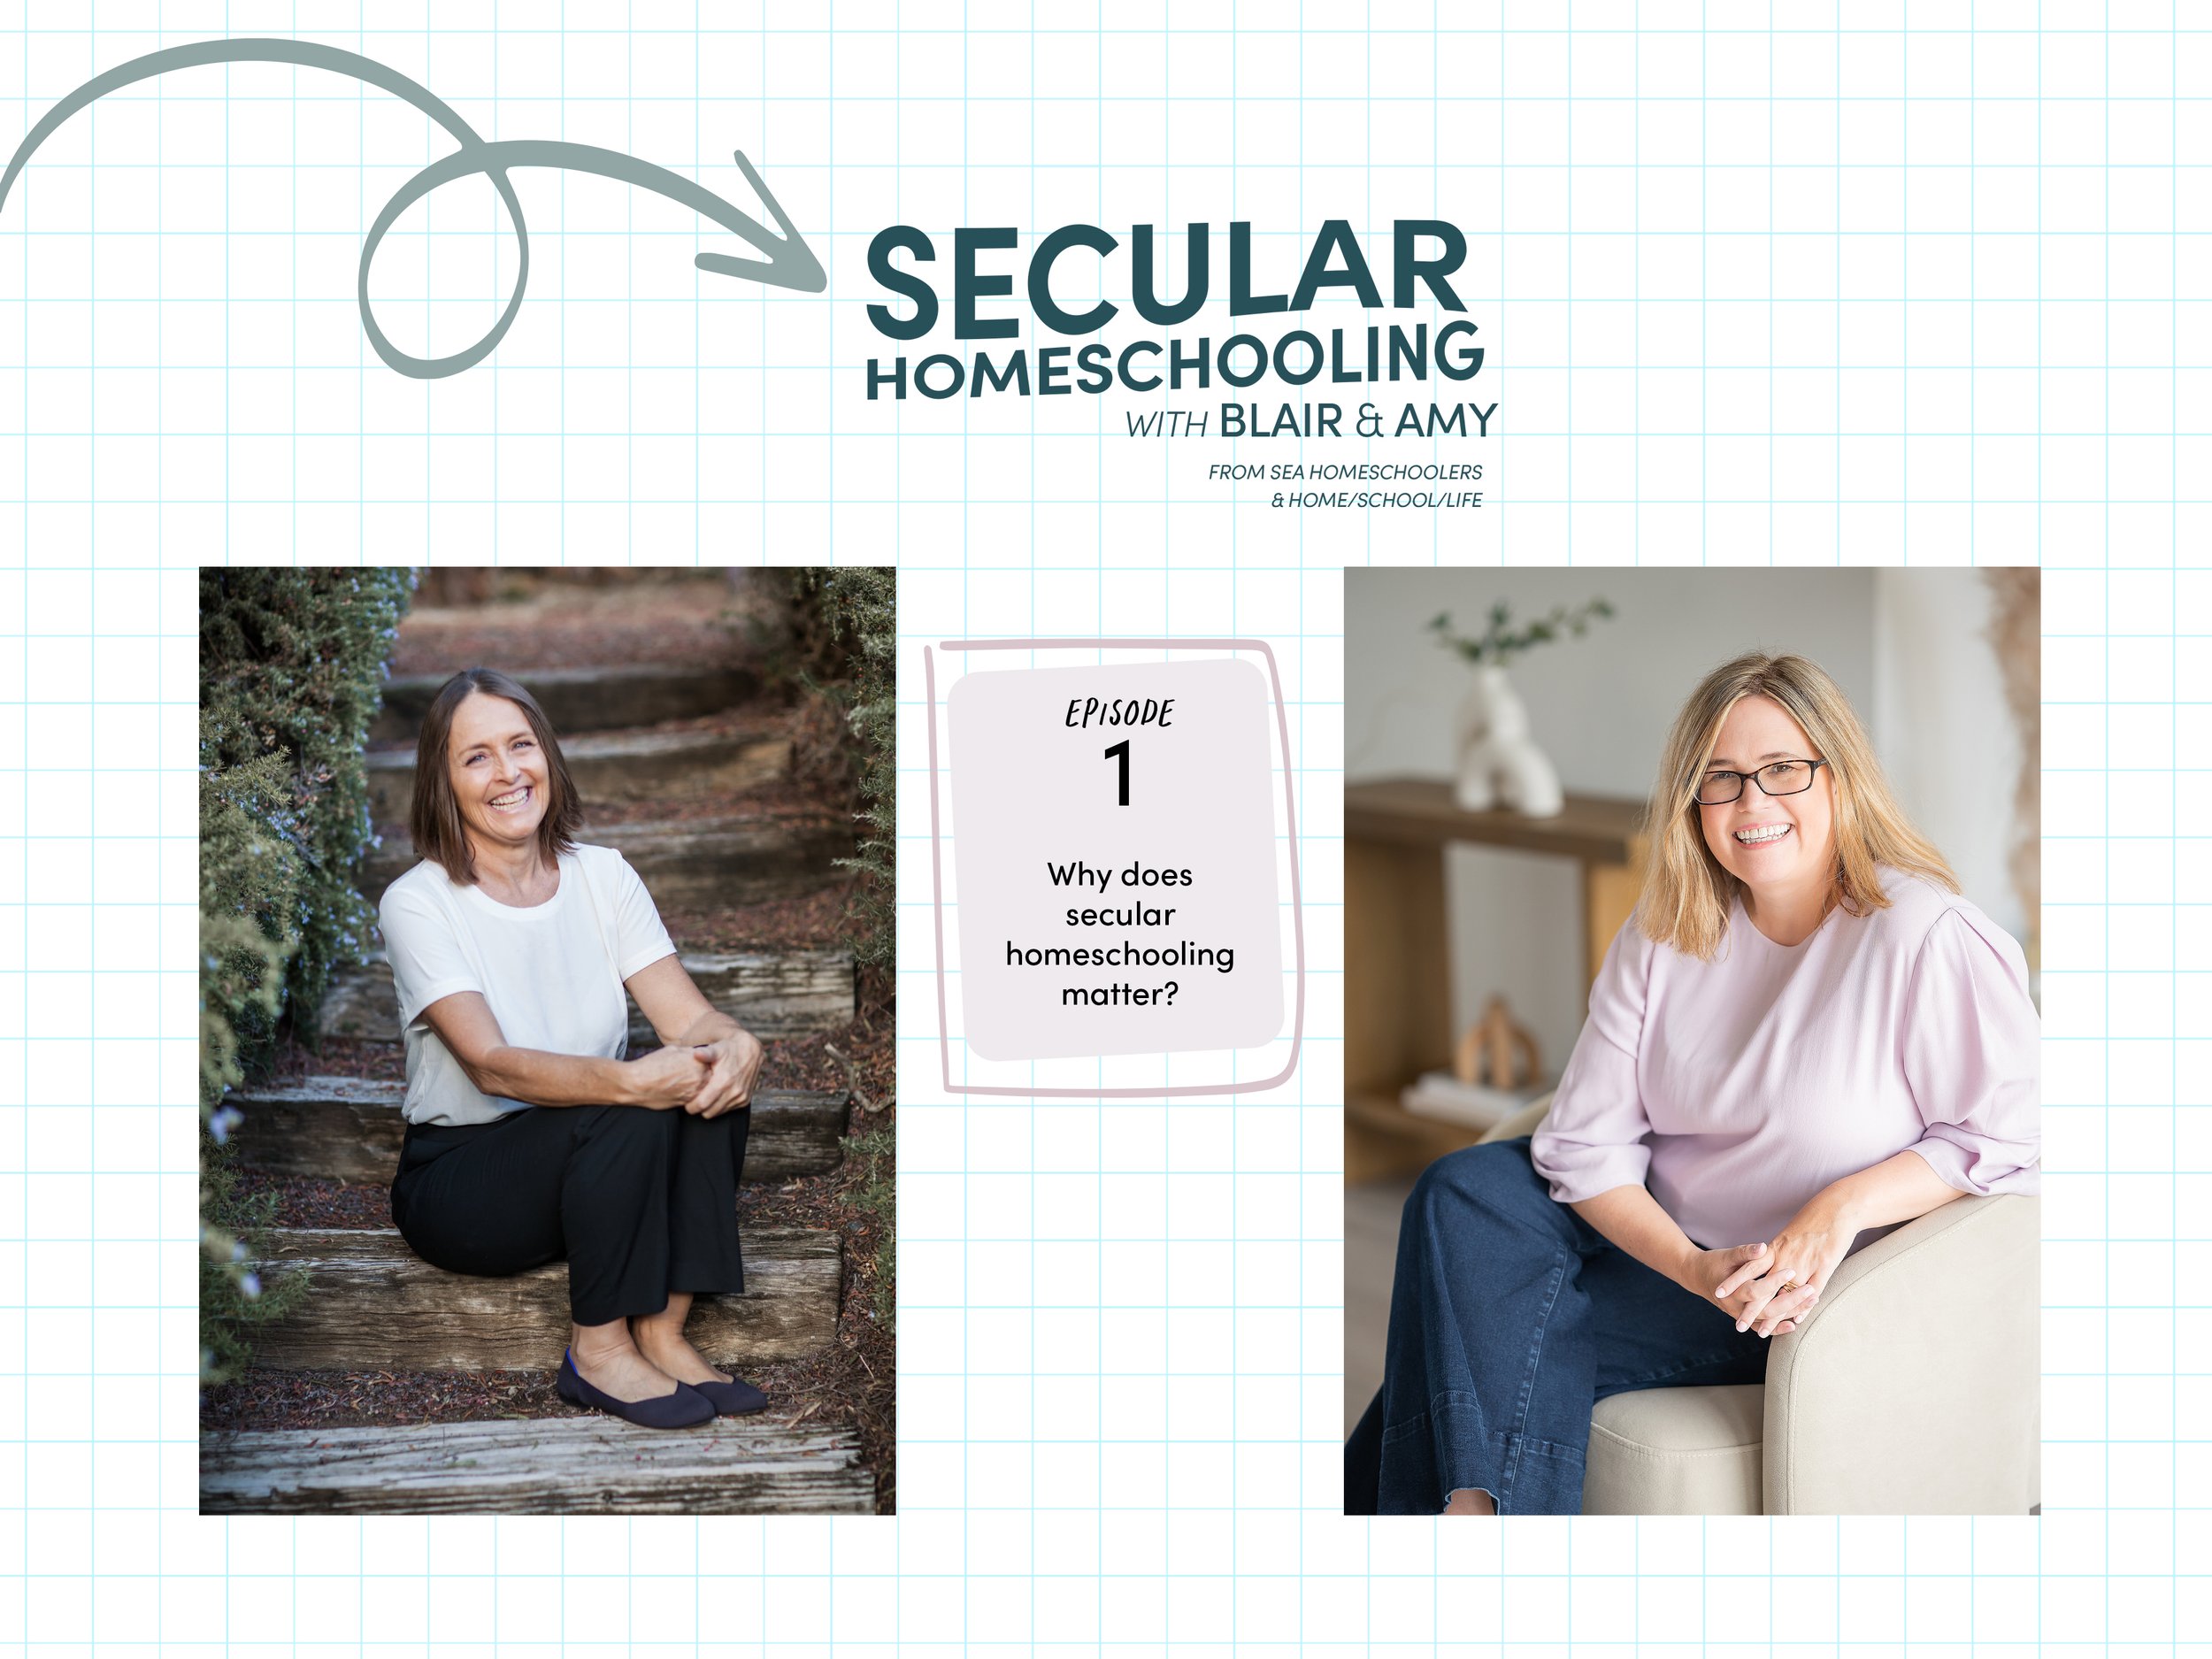 Secular Homeschooling podcast, Secular Homeschooling podcast with blair and amy